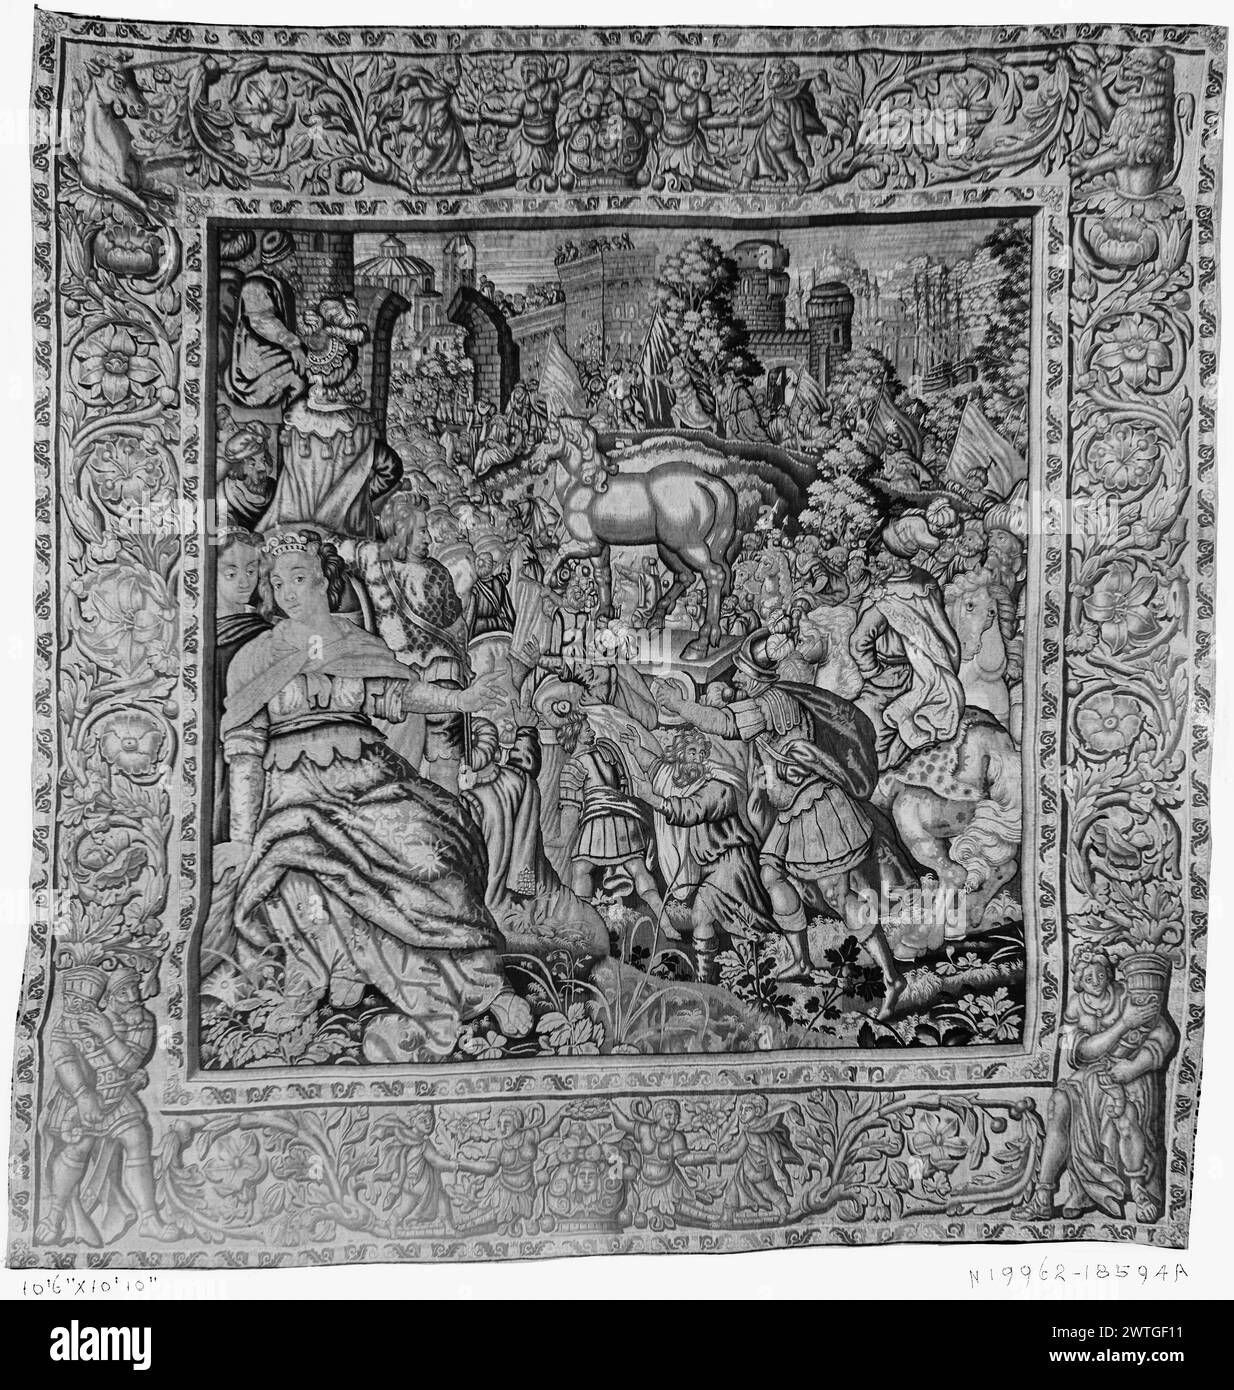 Wooden horse is brought into city of Troy. unknown c. 1620-1660 Tapestry Dimensions: H 10'10' x W 10'6' Tapestry Materials/Techniques: unknown Culture: Flemish Weaving Center: Brussels Ownership History: French & Co. purchased from Robert L. Gerry, invoiced 4/3/1936 [SS 18594]. Minerva (Athena) points toward Trojan horse as it is being moved toward city gate (BRD) acanthus scroll inhabited by various figures, lion & horse The tops of the side borders have been cut down (Campbell). French & Co. stock sheet in archive, 18594-a [also lists: 41436] Related Works: Panels in set: GCPA 0240973-024097 Stock Photo